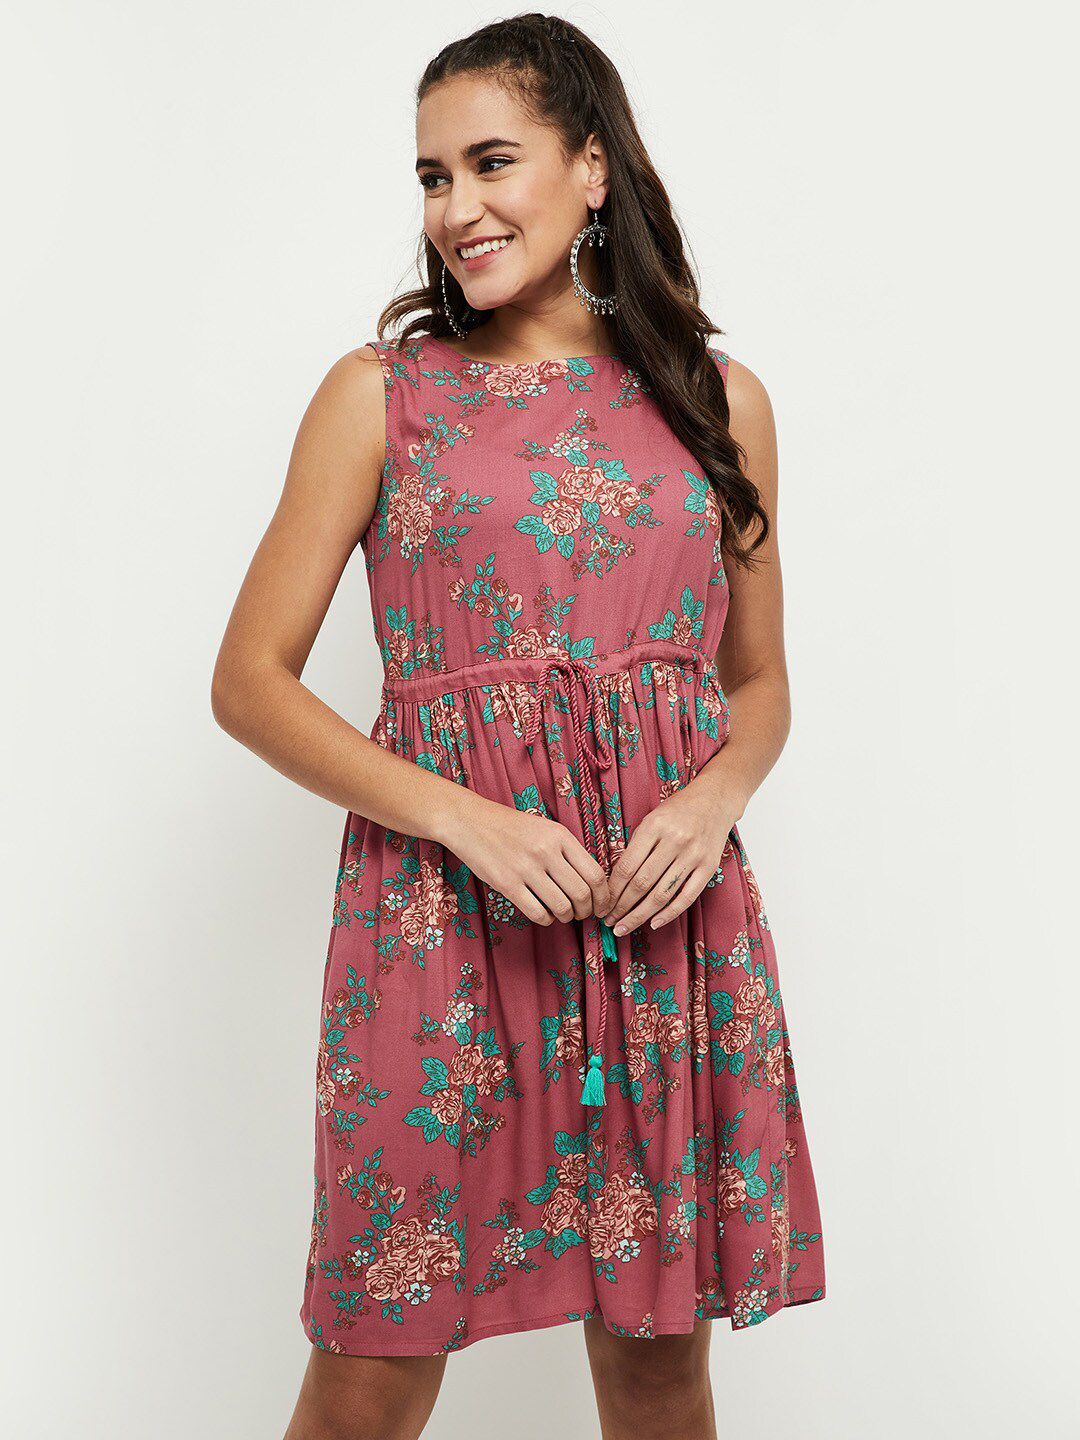 max Red Floral Dress Price in India